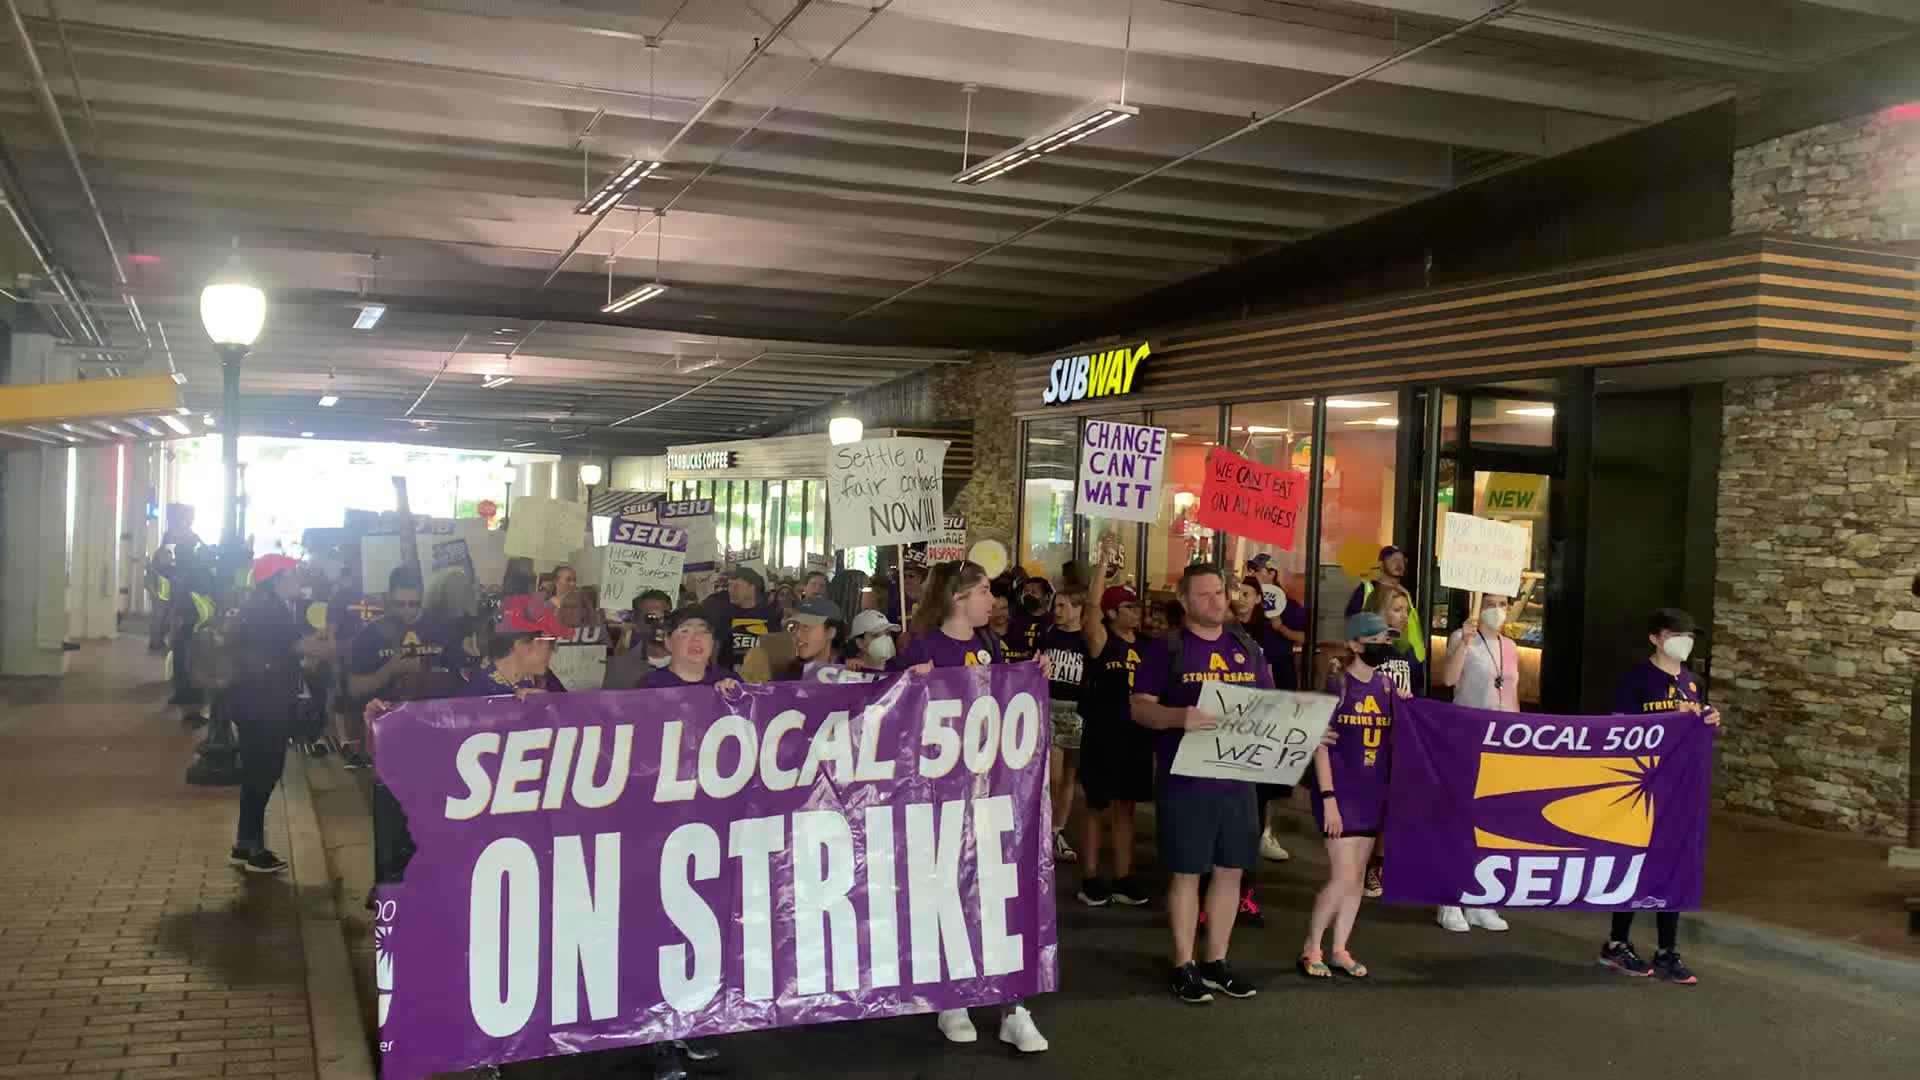 Video of the Strike (32)